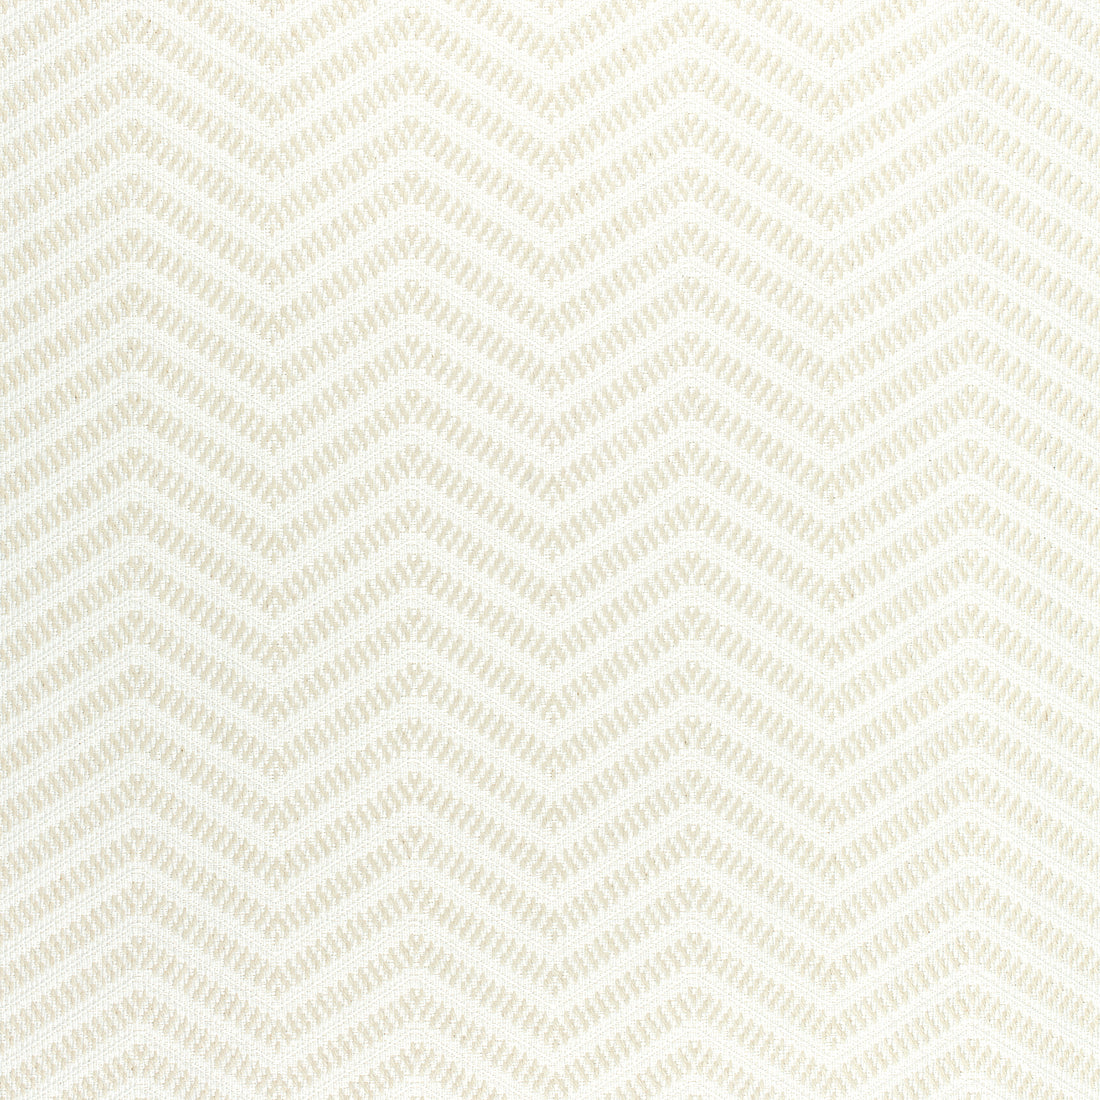 Matari Chevron fabric in almond color - pattern number W80631 - by Thibaut in the Pinnacle collection